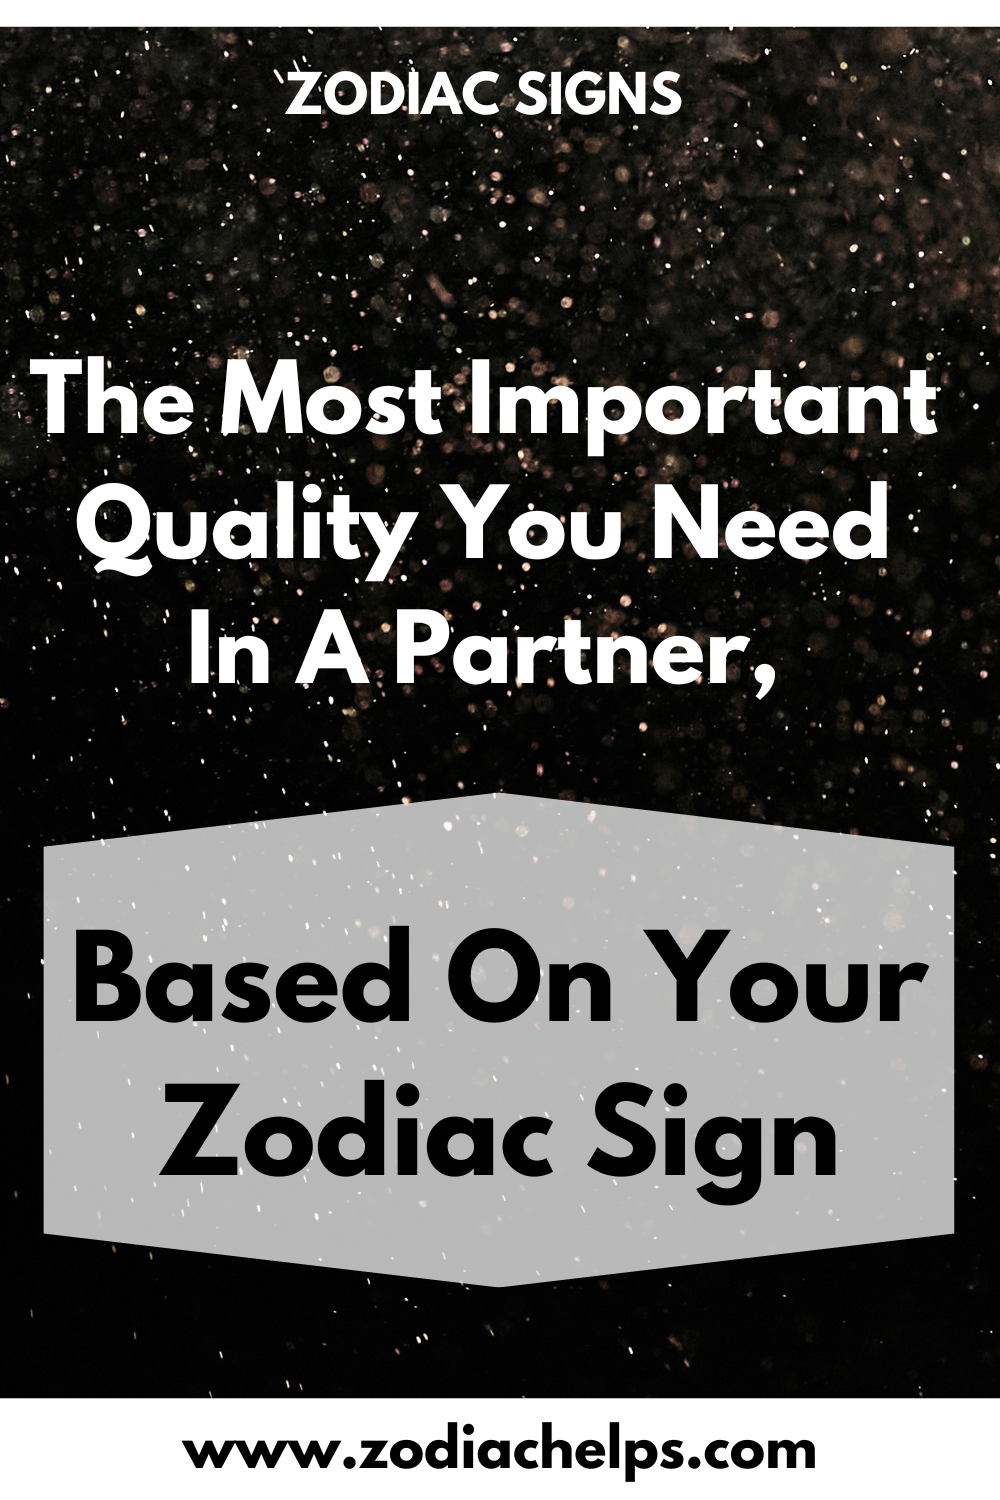 The Most Important Quality You Need In A Partner, Based On Your Zodiac Sign